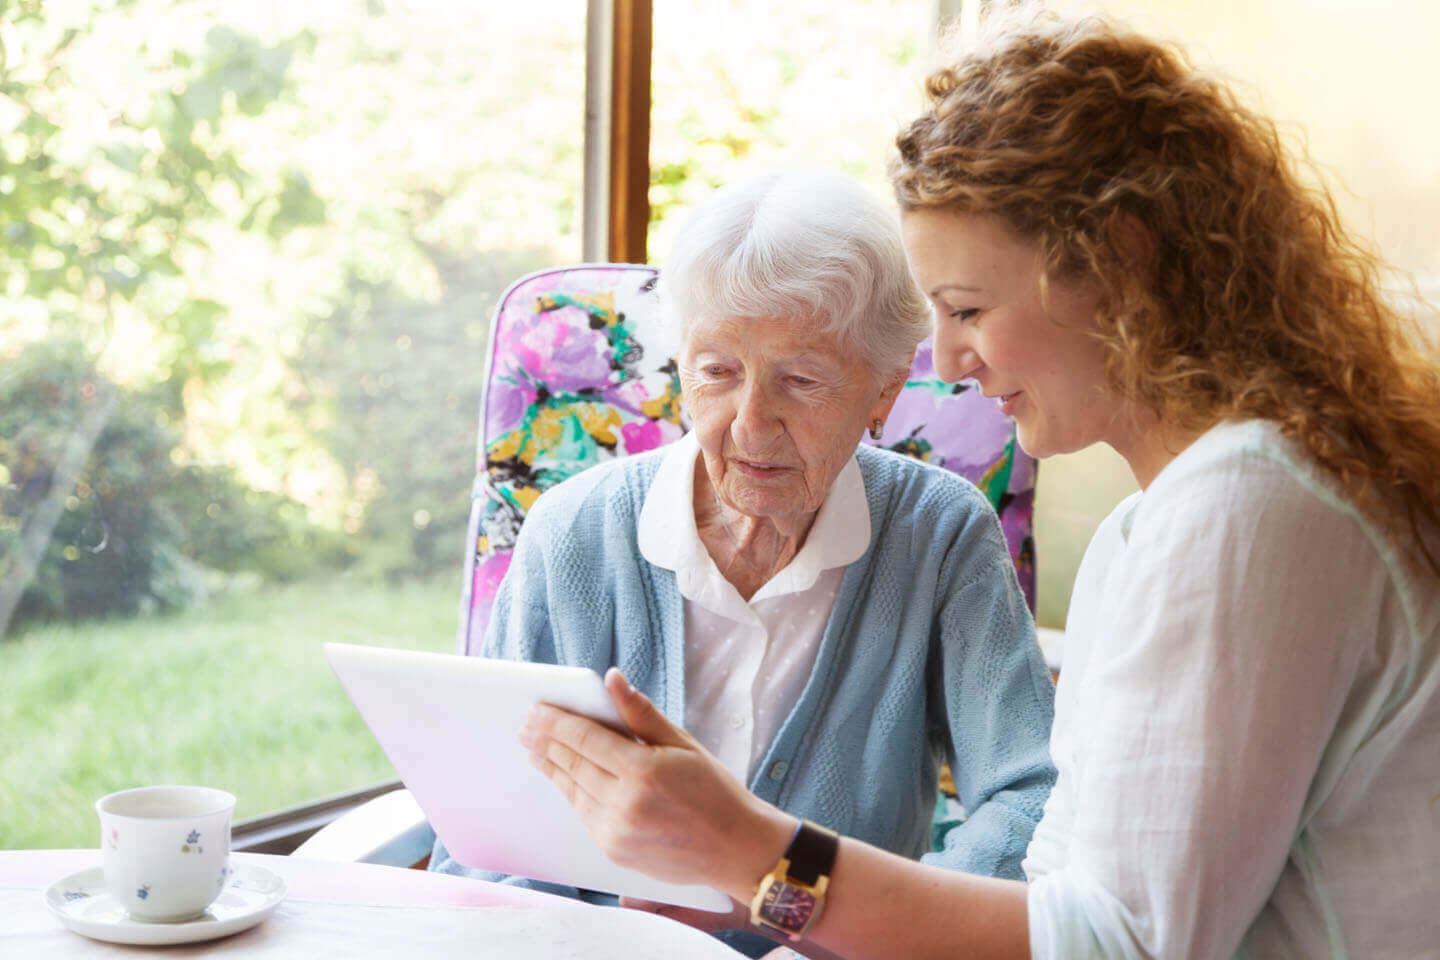 Elderly women being supported in reading a document